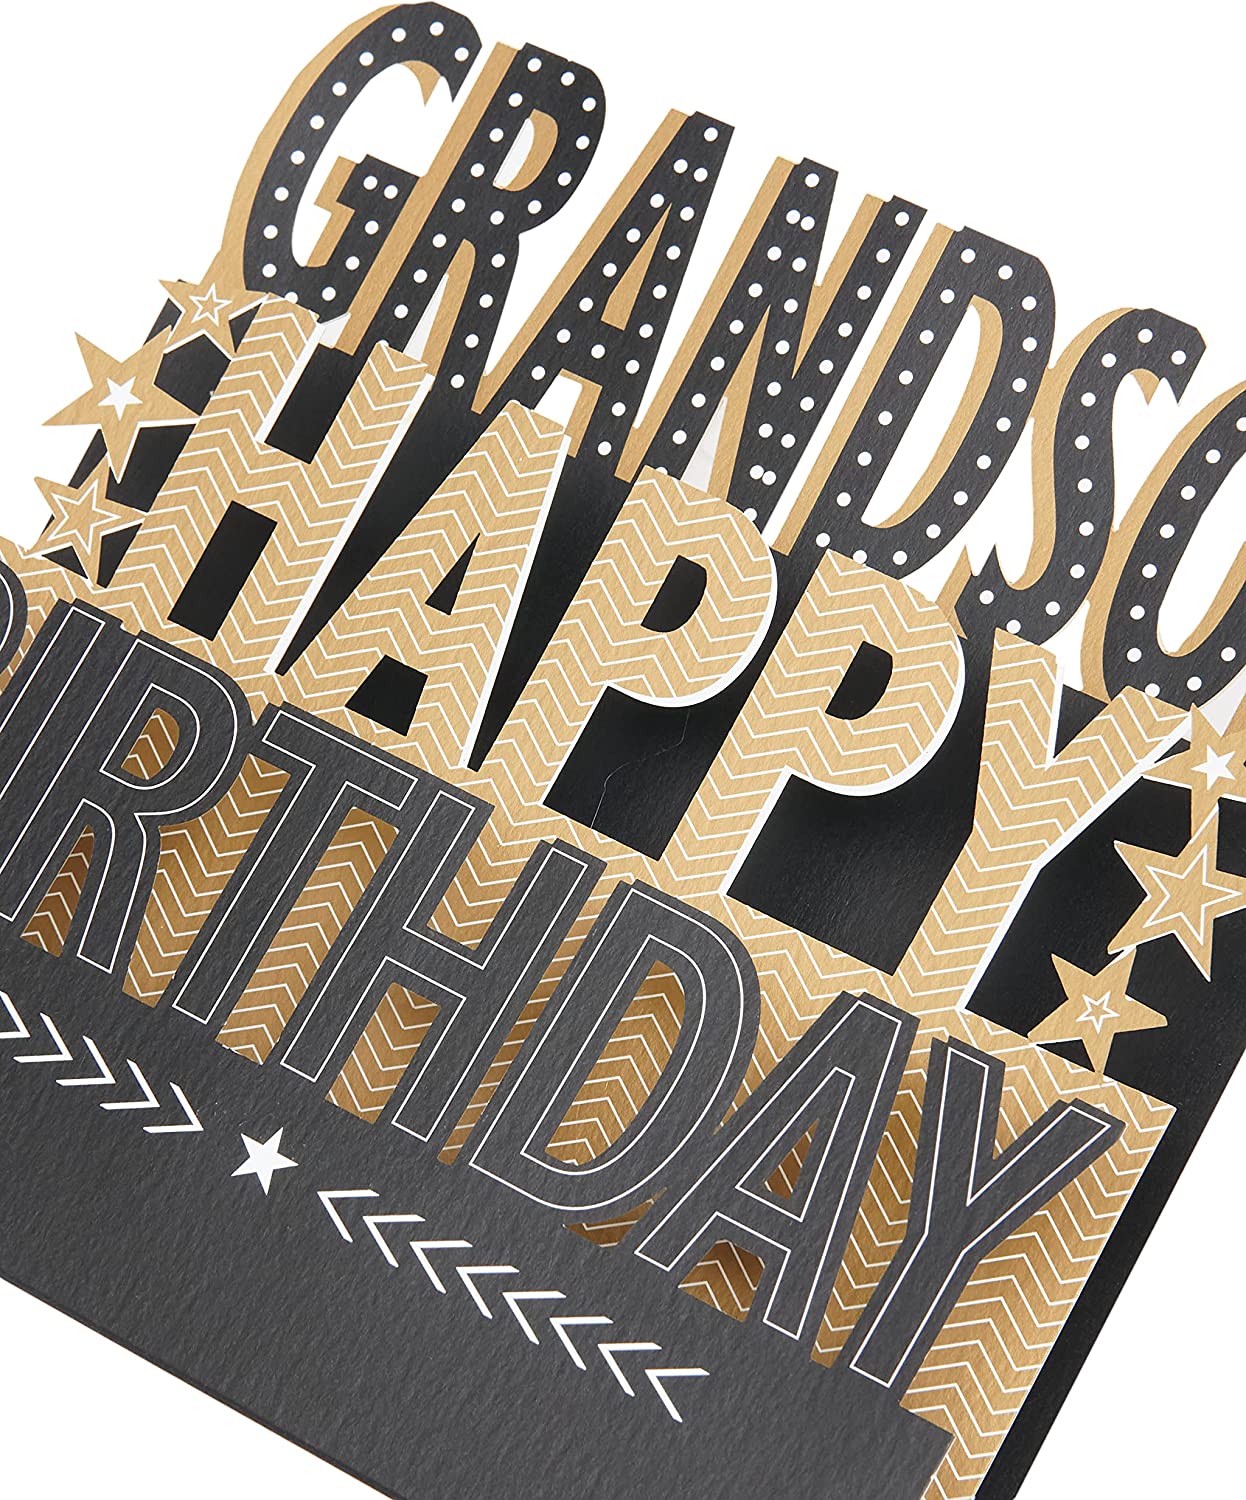 Cute Design with Pop Up 3D Lettering Grandson Birthday Card